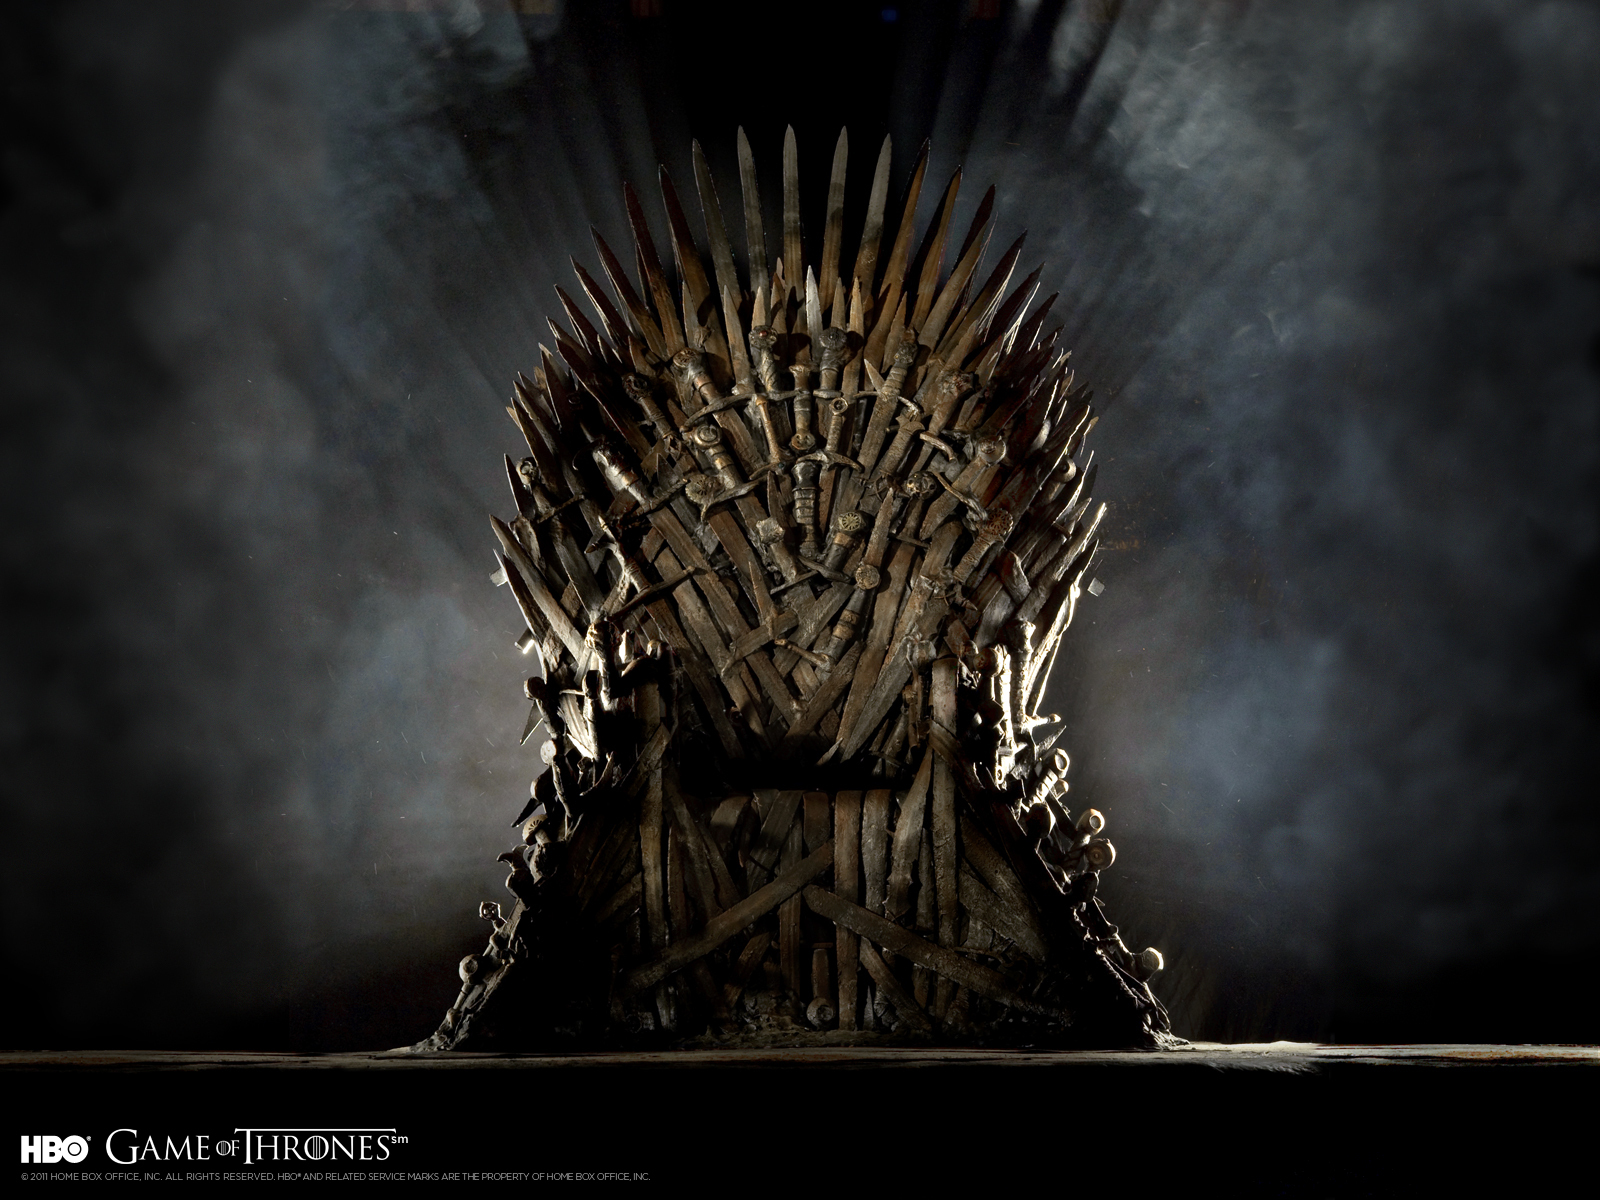 Iron Throne Game of Thrones Wallpaper